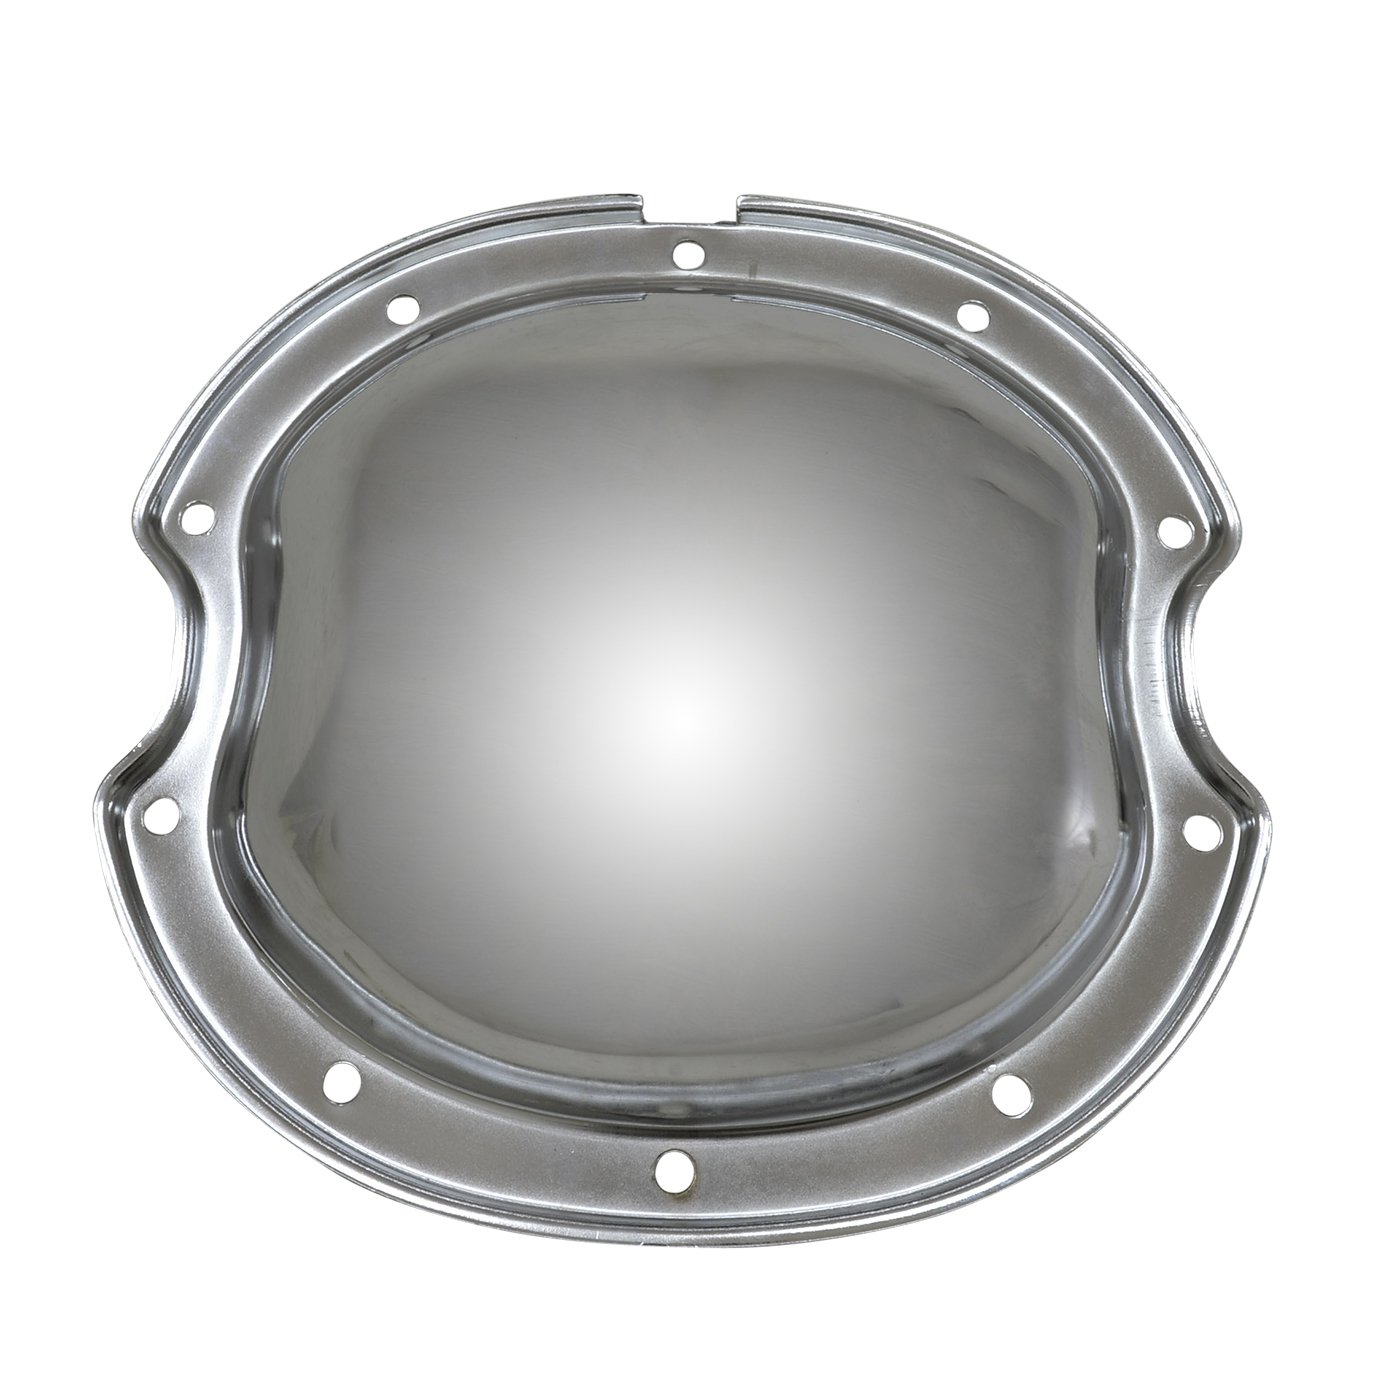 Differential Cover for GM 8.200 in. Buick, Oldsmobile, Pontiac [Chrome]